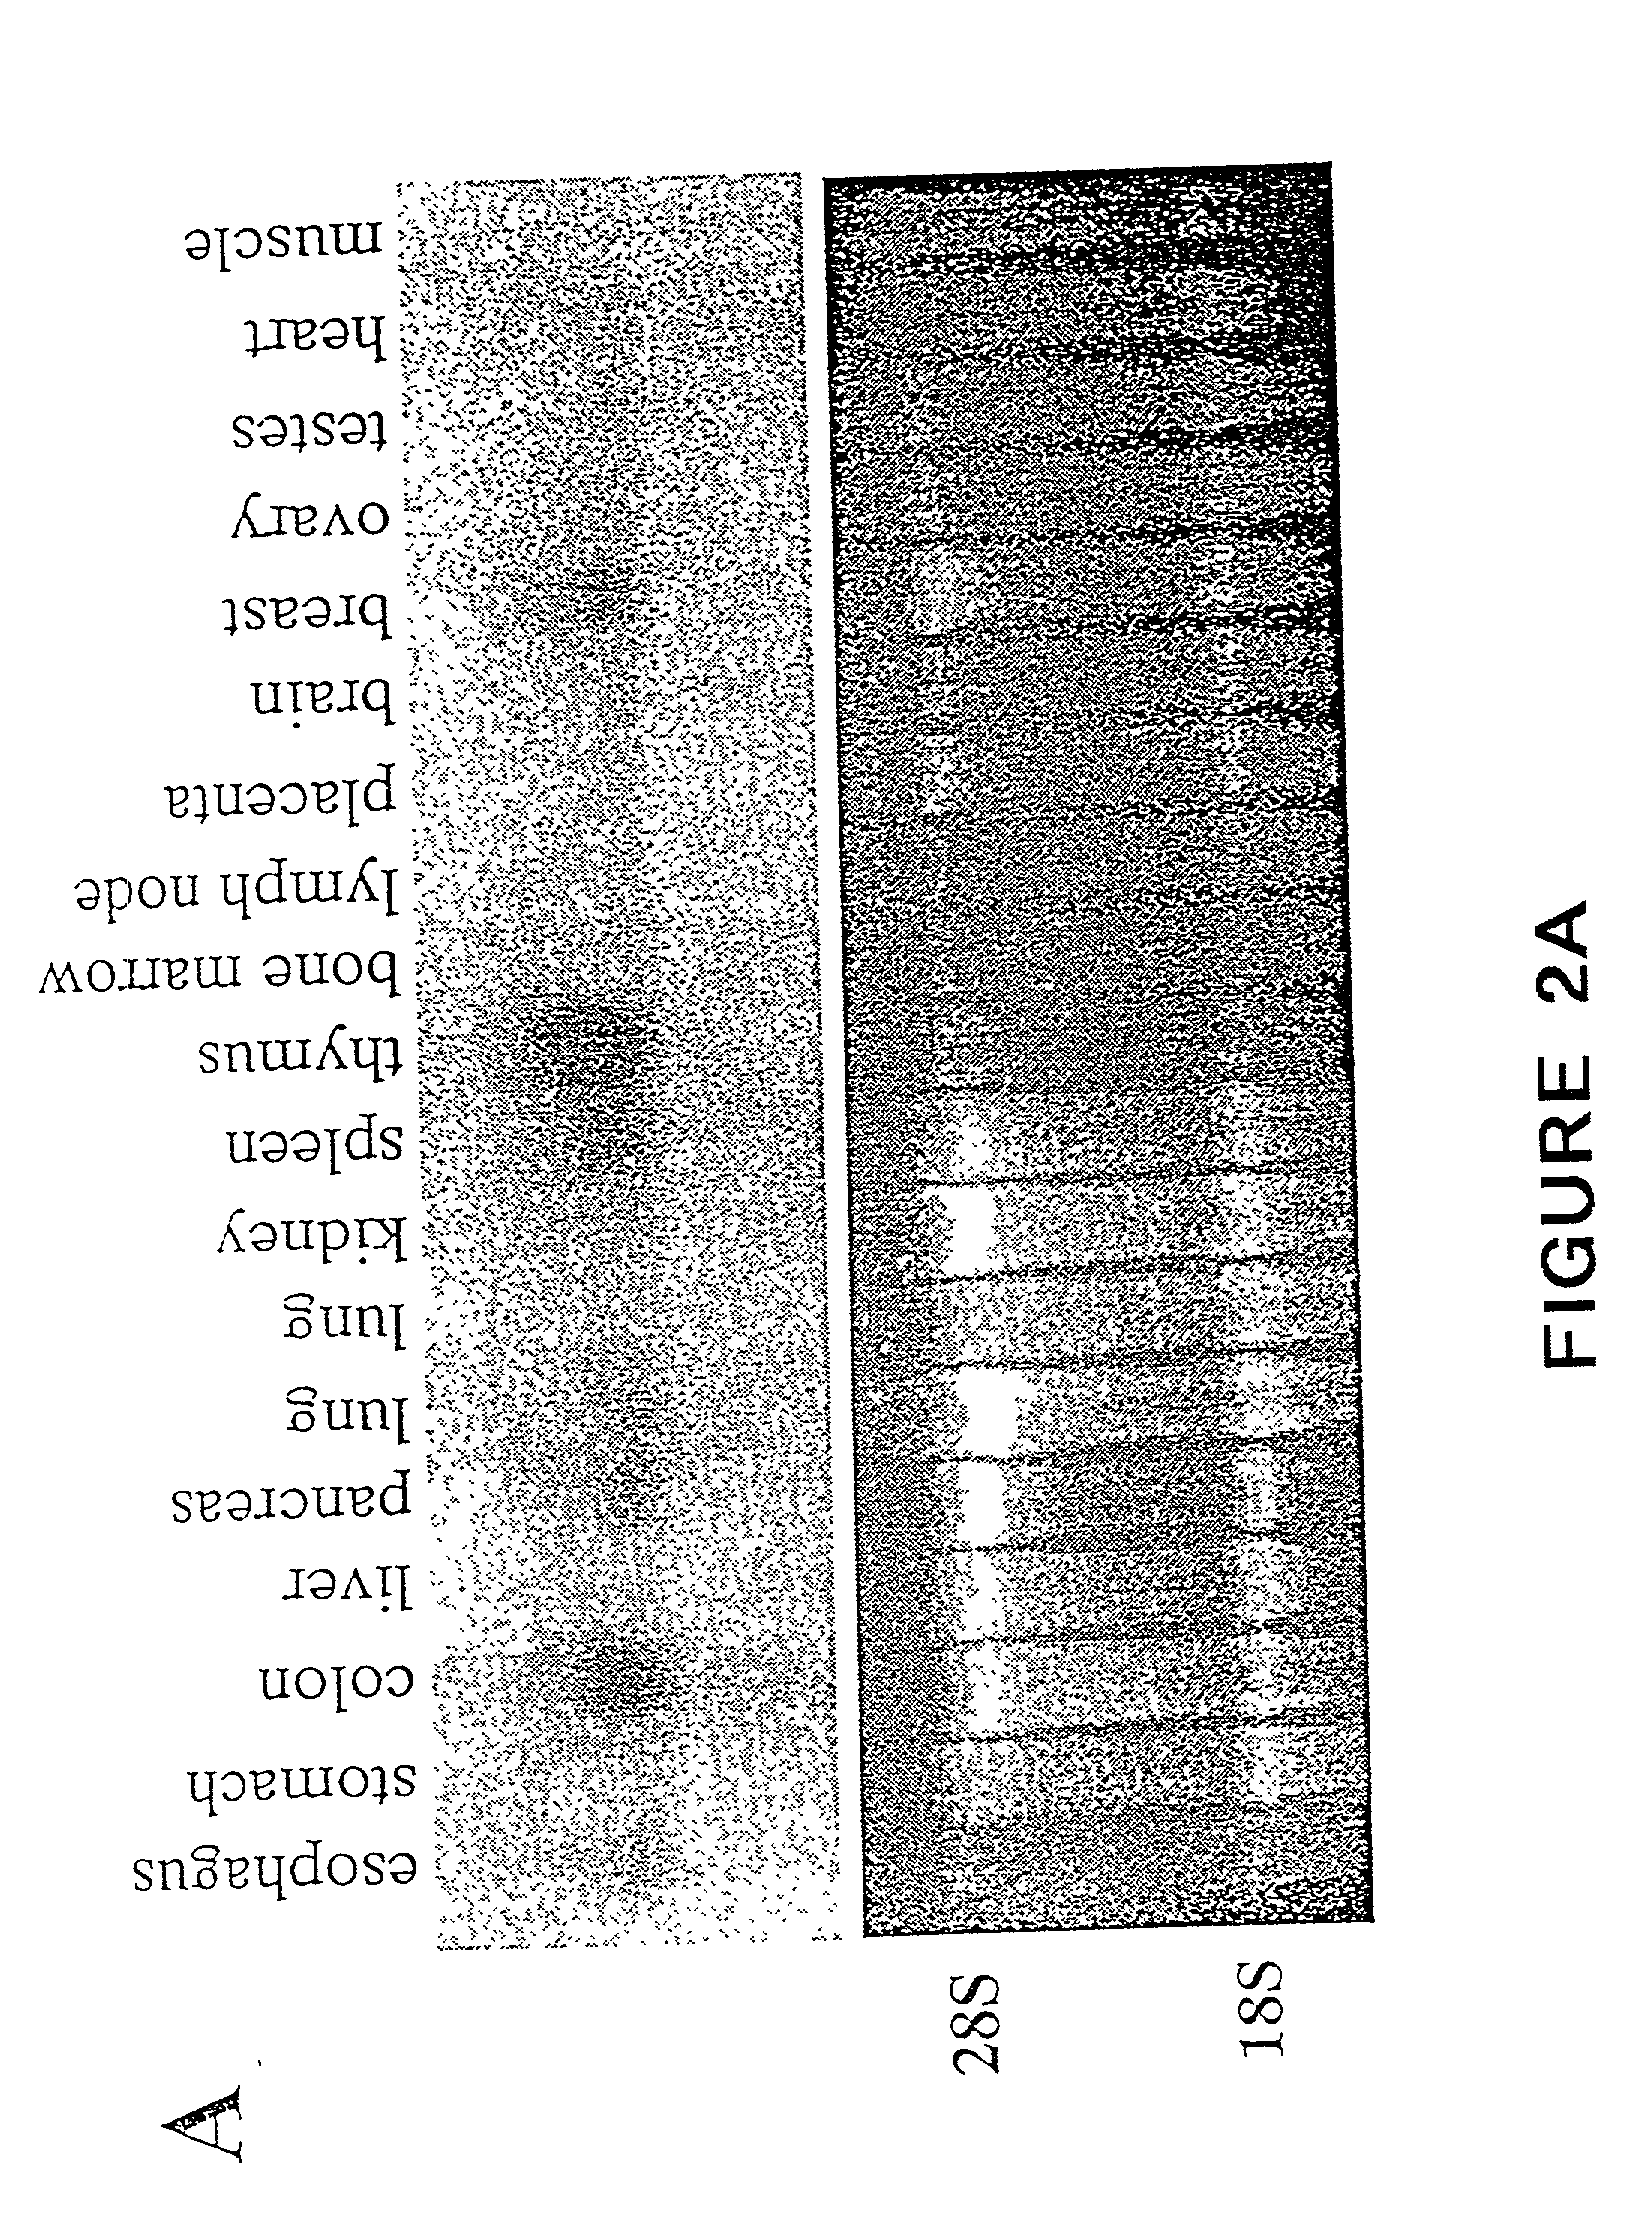 Methods and compositions for diagnosis and treatment of cancer